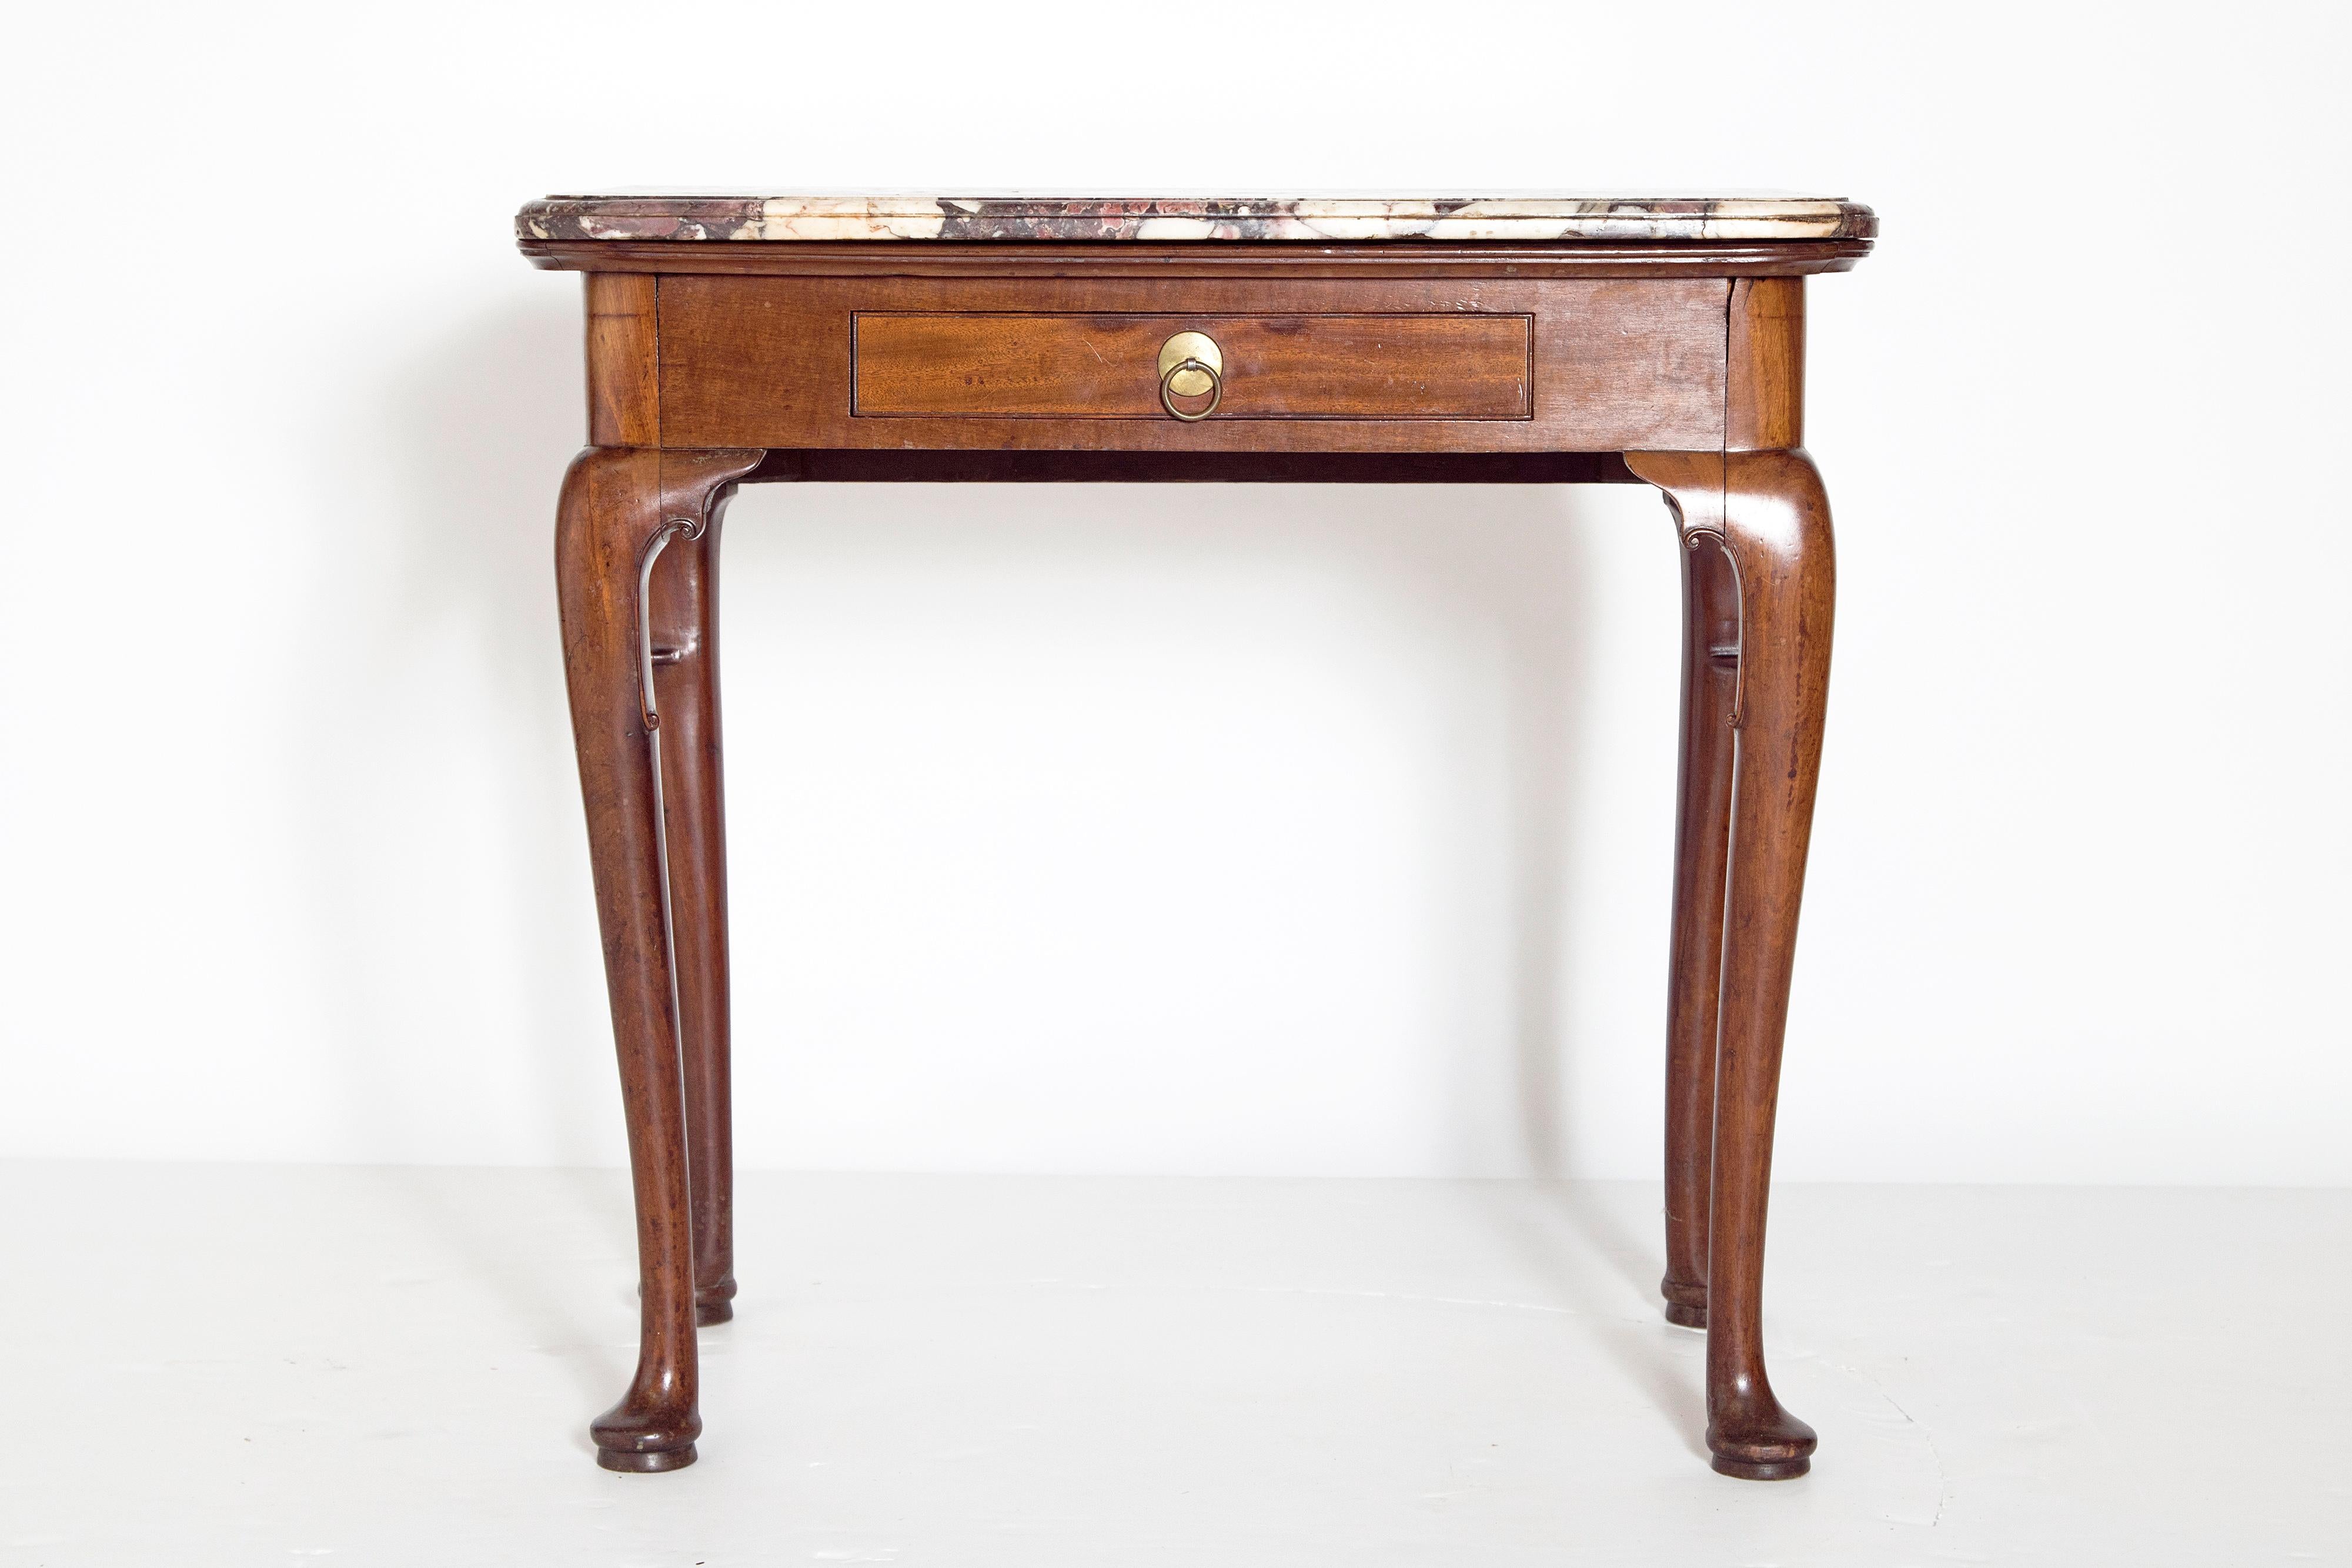 A Queen Anne mahogany side table with one drawer. Raised on cabriole legs with pad feet. Each leg knee has delicately carved C-scrolls. Shaped 